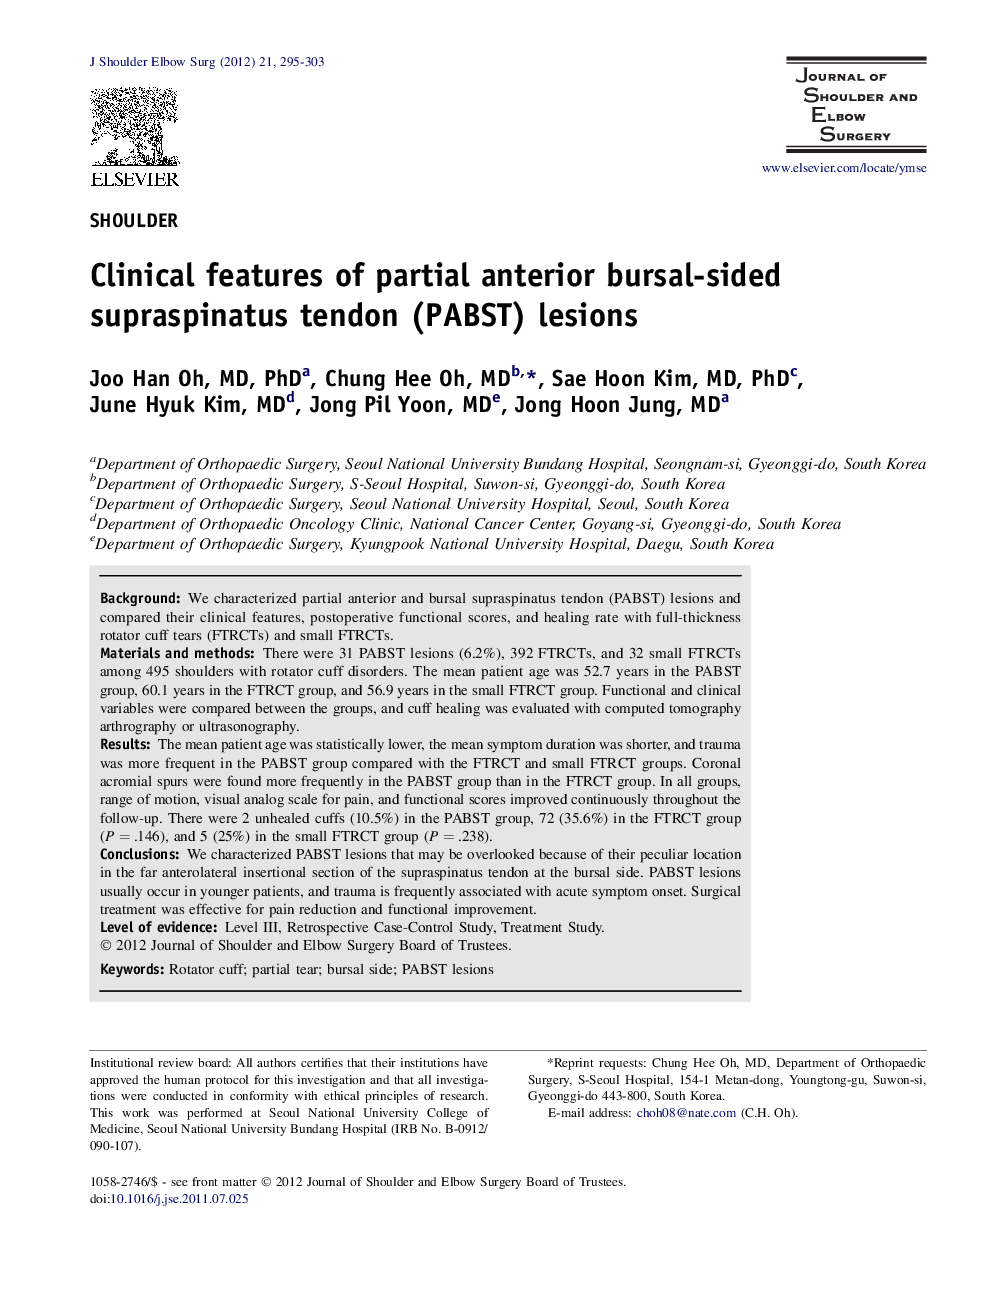 Clinical features of partial anterior bursal-sided supraspinatus tendon (PABST) lesions 